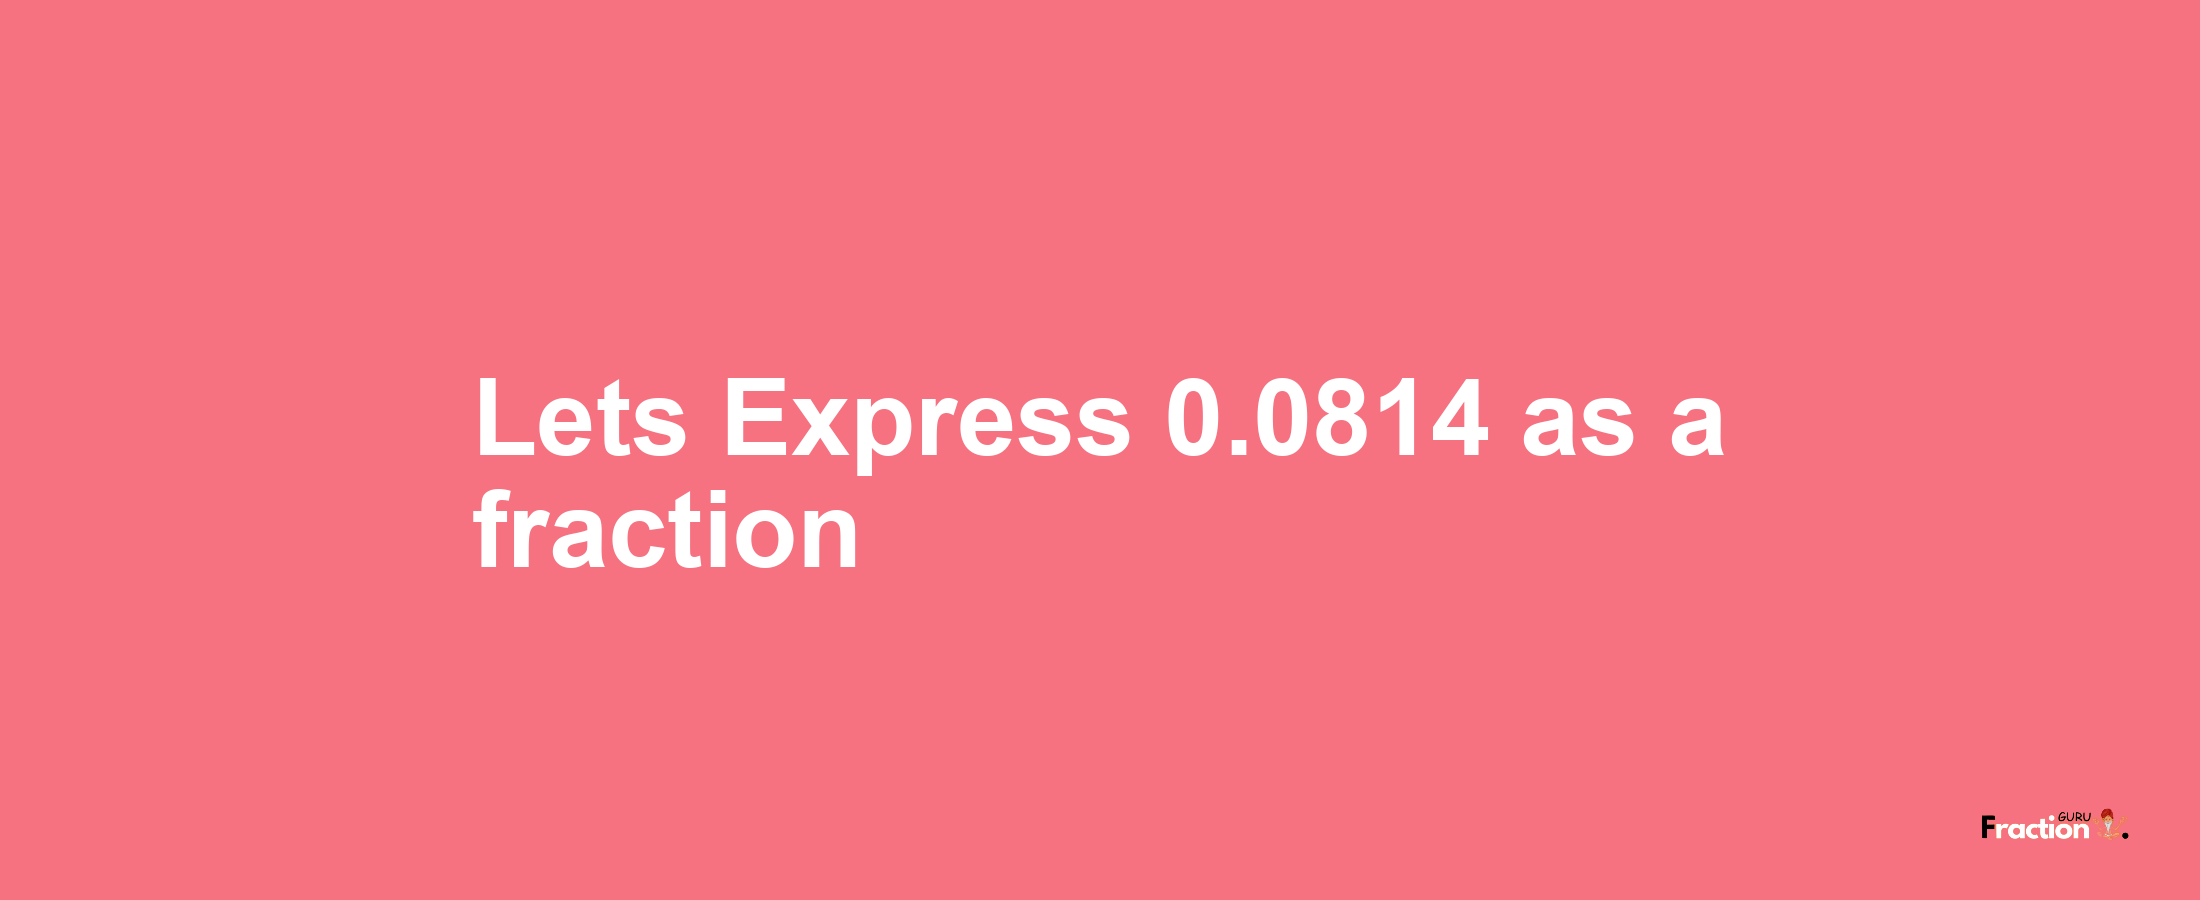 Lets Express 0.0814 as afraction